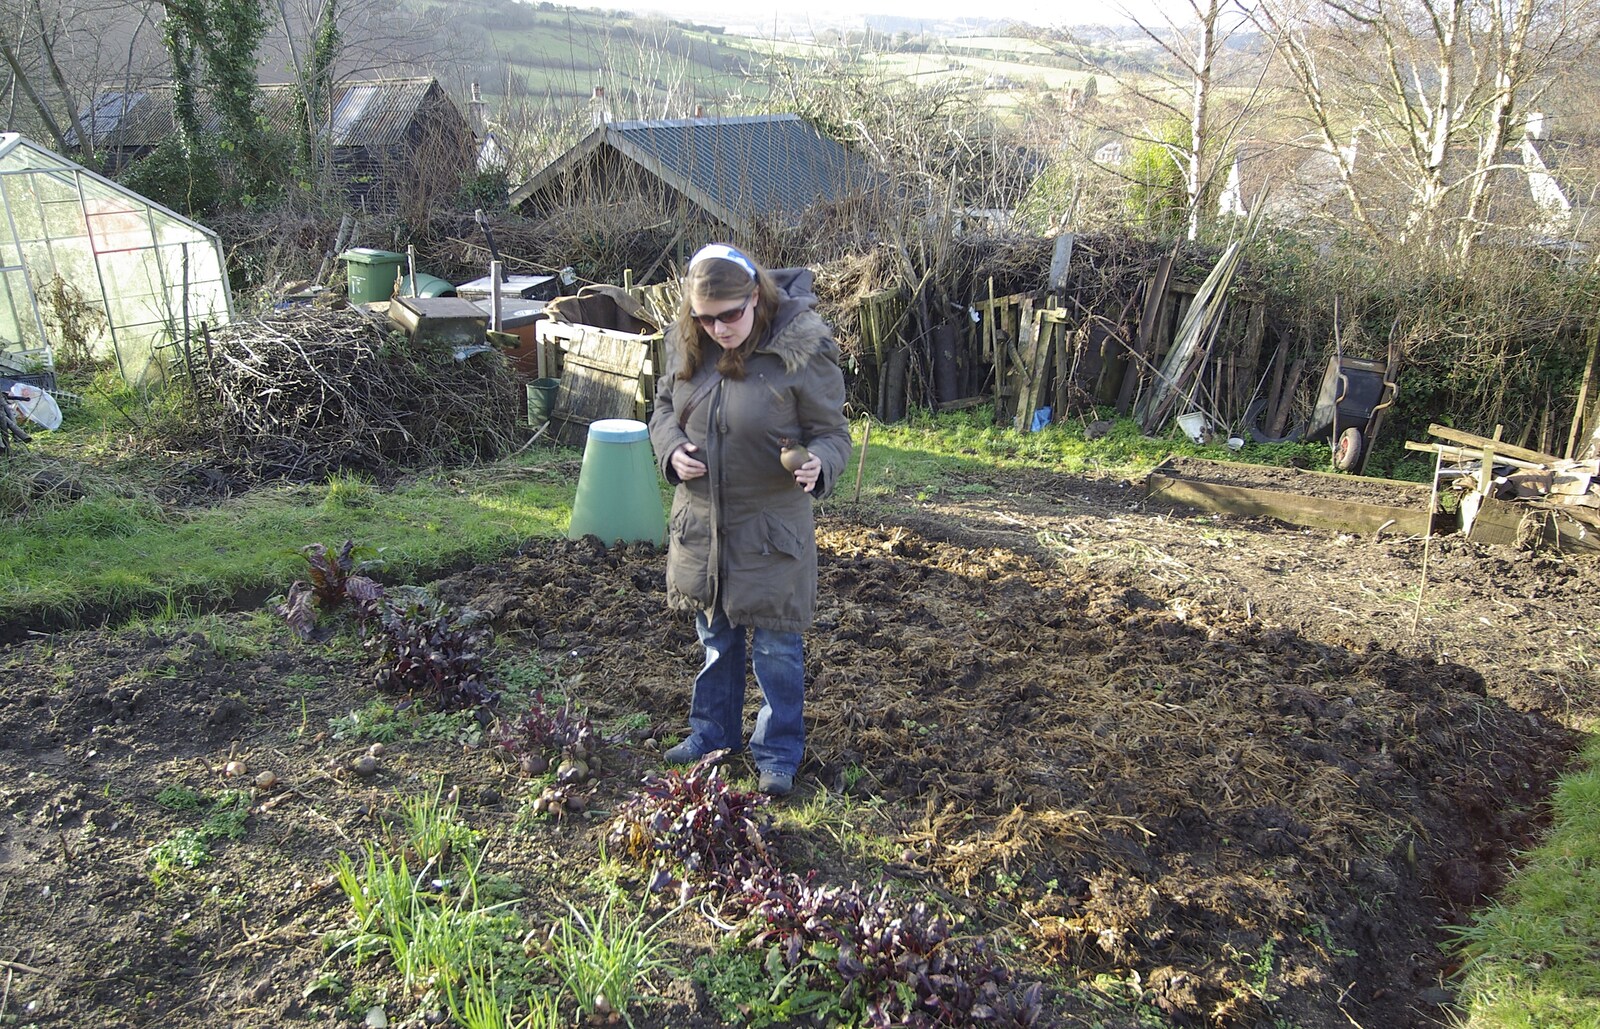 Isobel scopes out some of last year's beetroots from Matt's Allotment and Meldon Hill, Chagford, Devon - 26th December 2007